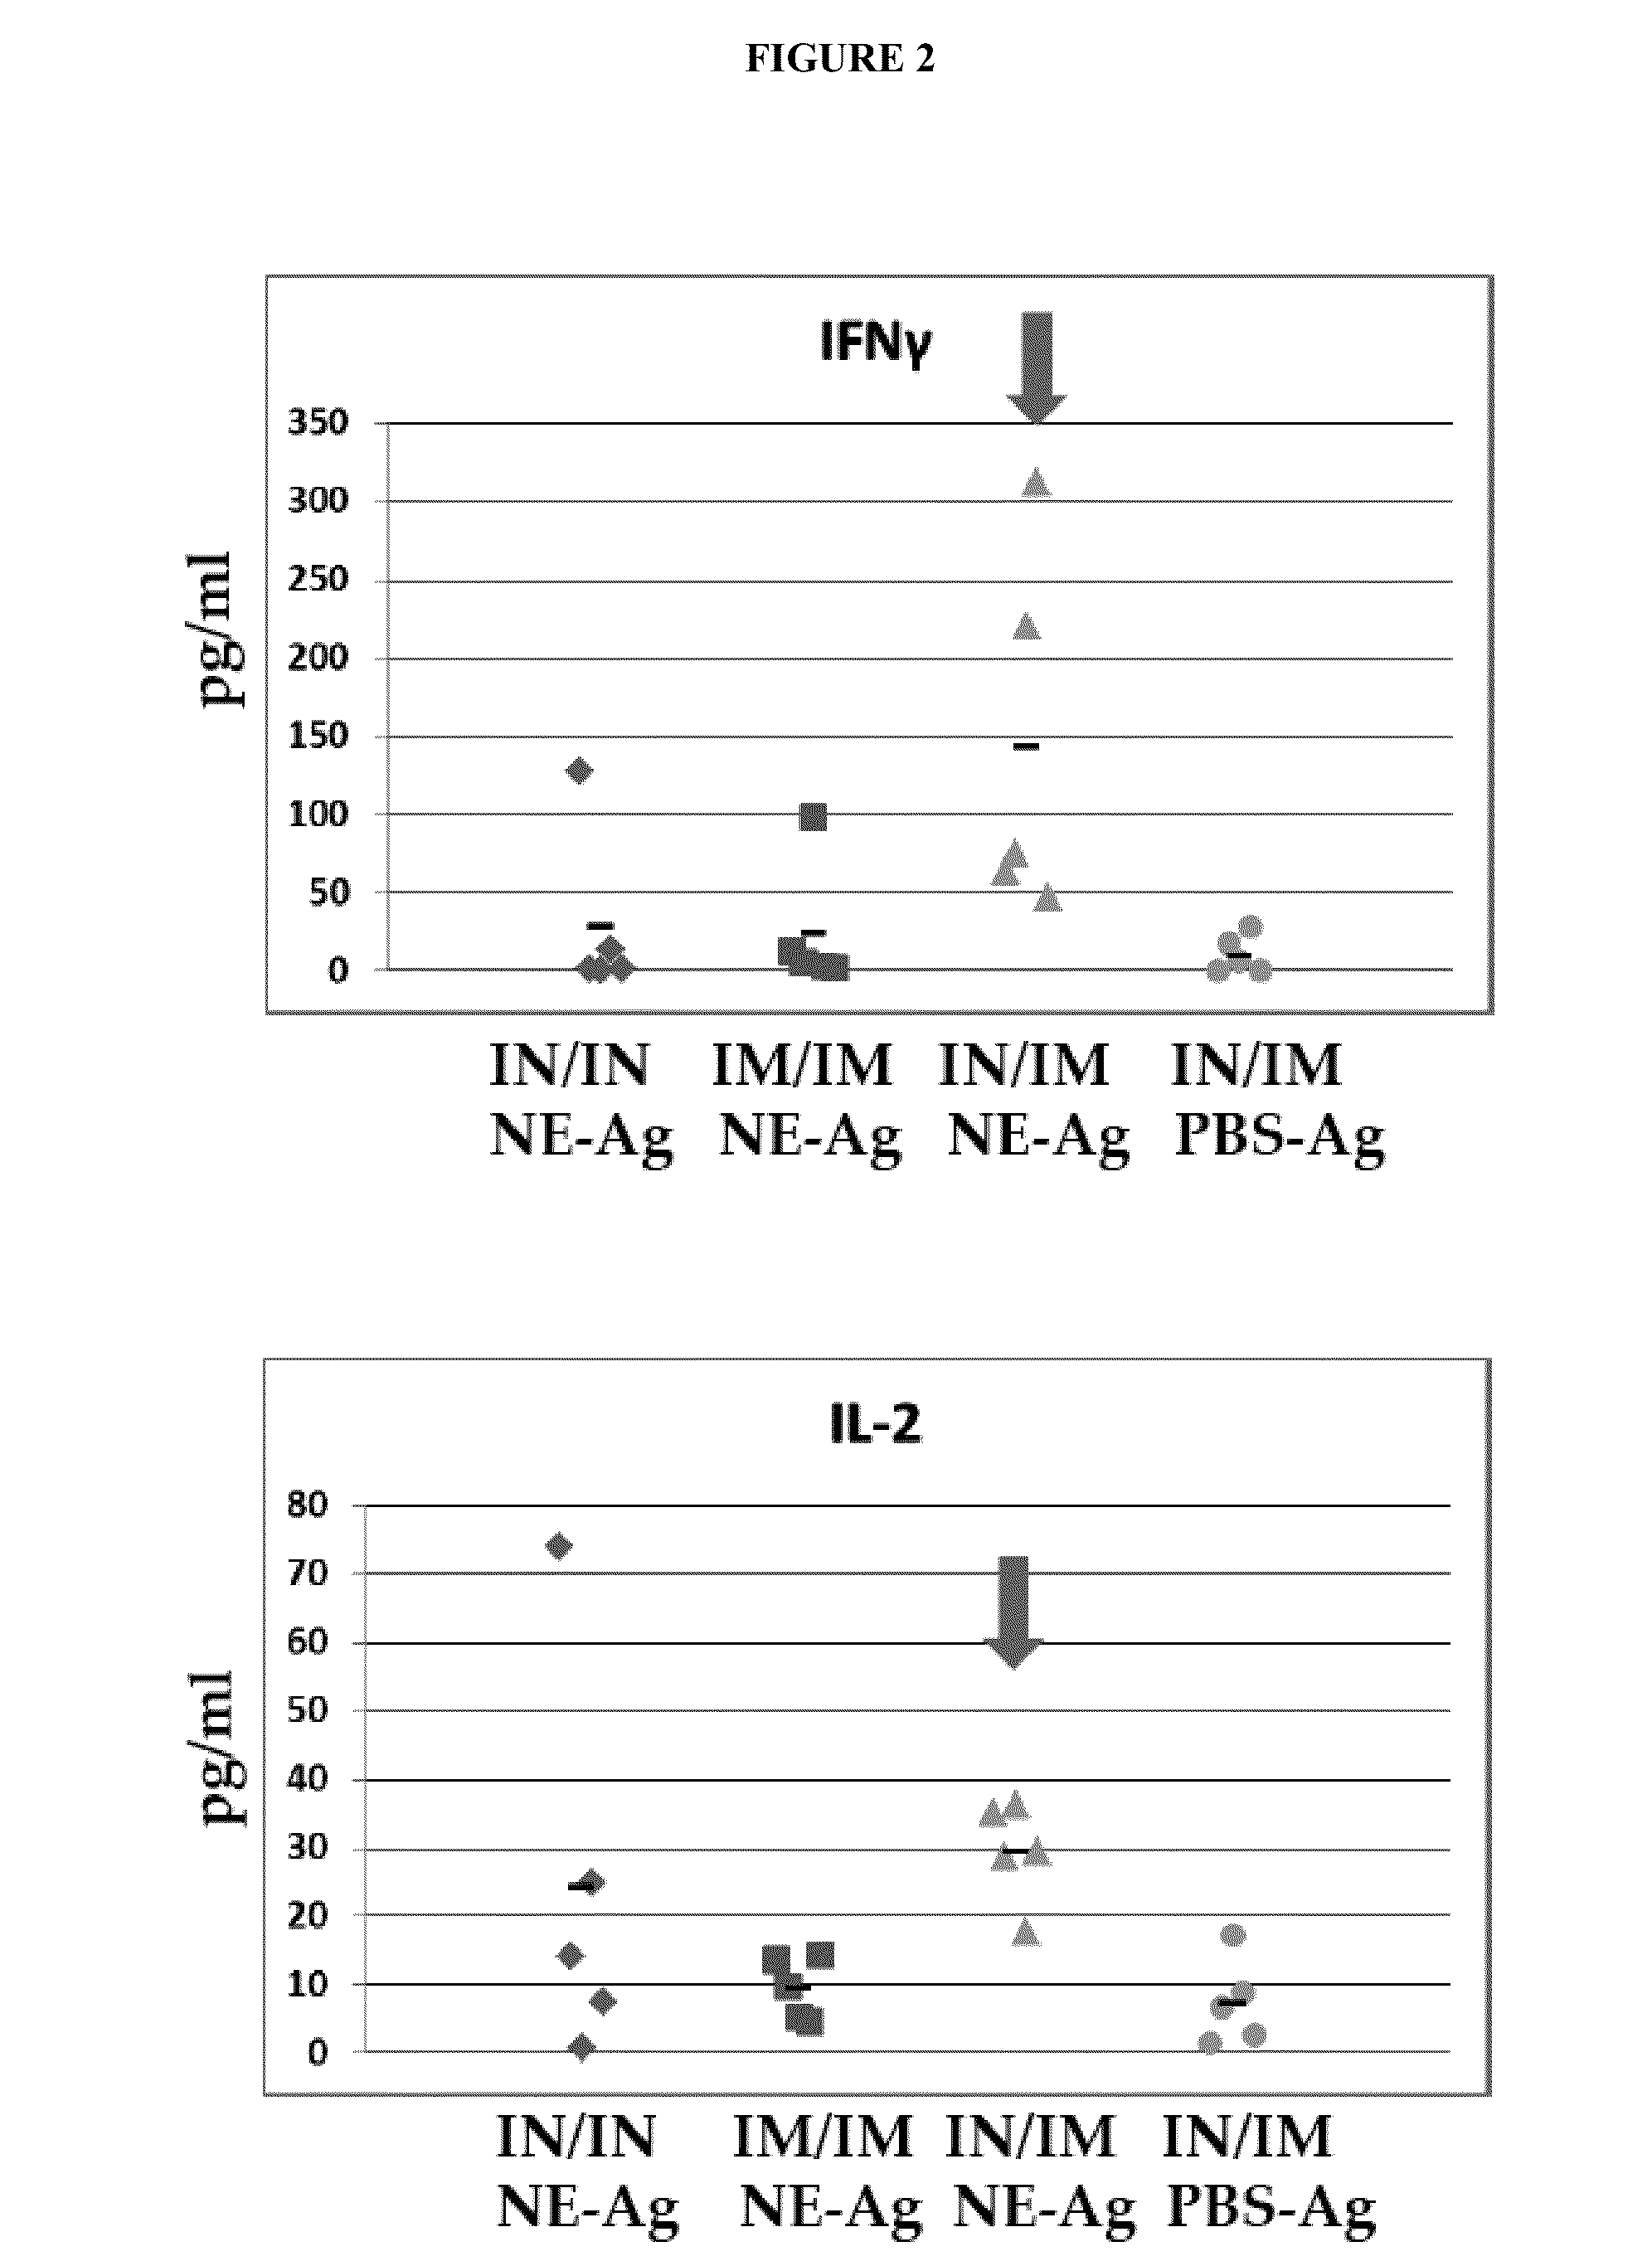 Immunogenic compositions comprising nanoemulsion and methods of administering the same